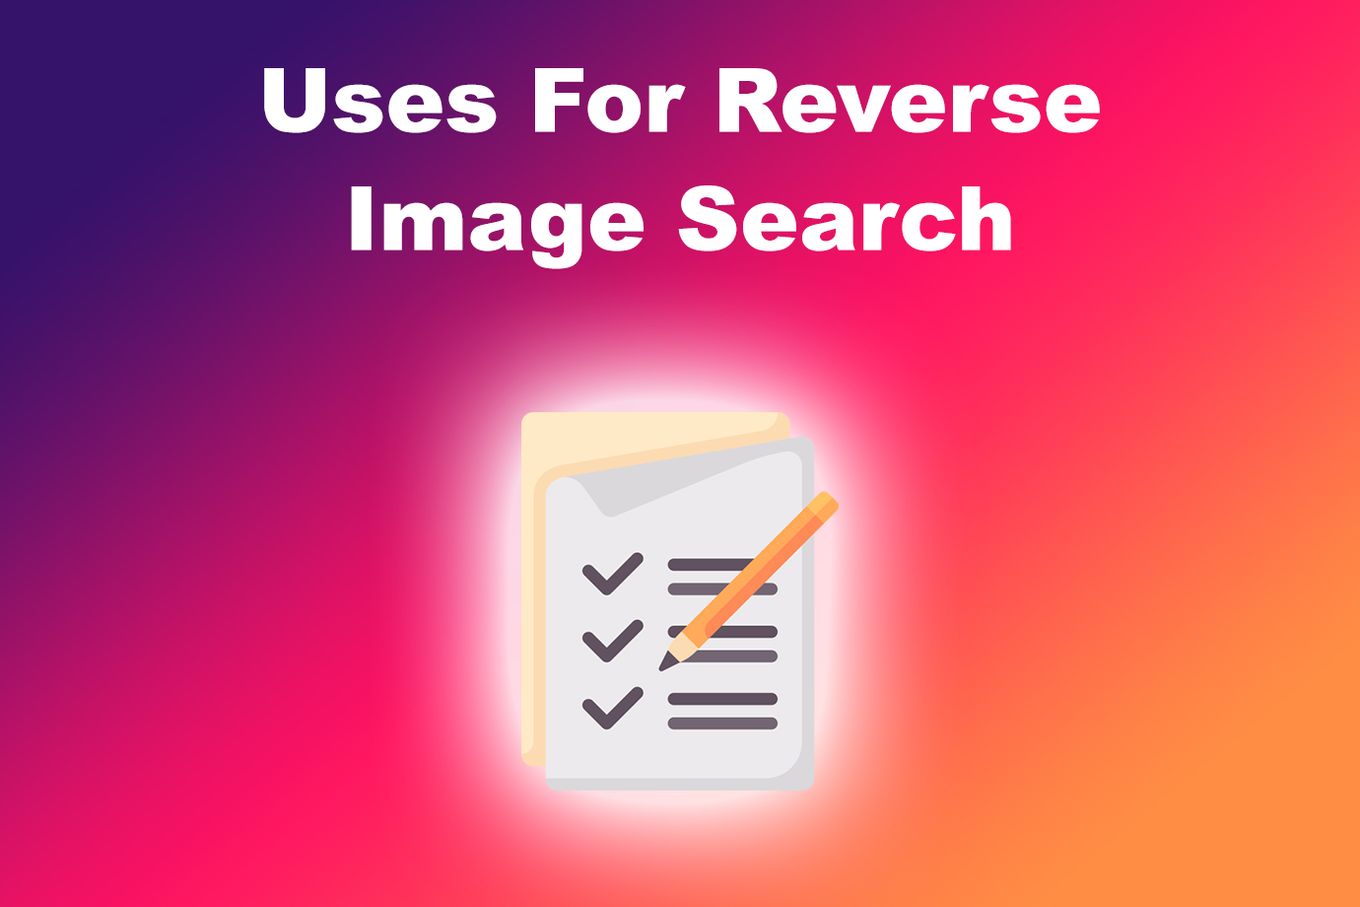 6 Uses For Reverse Image Search